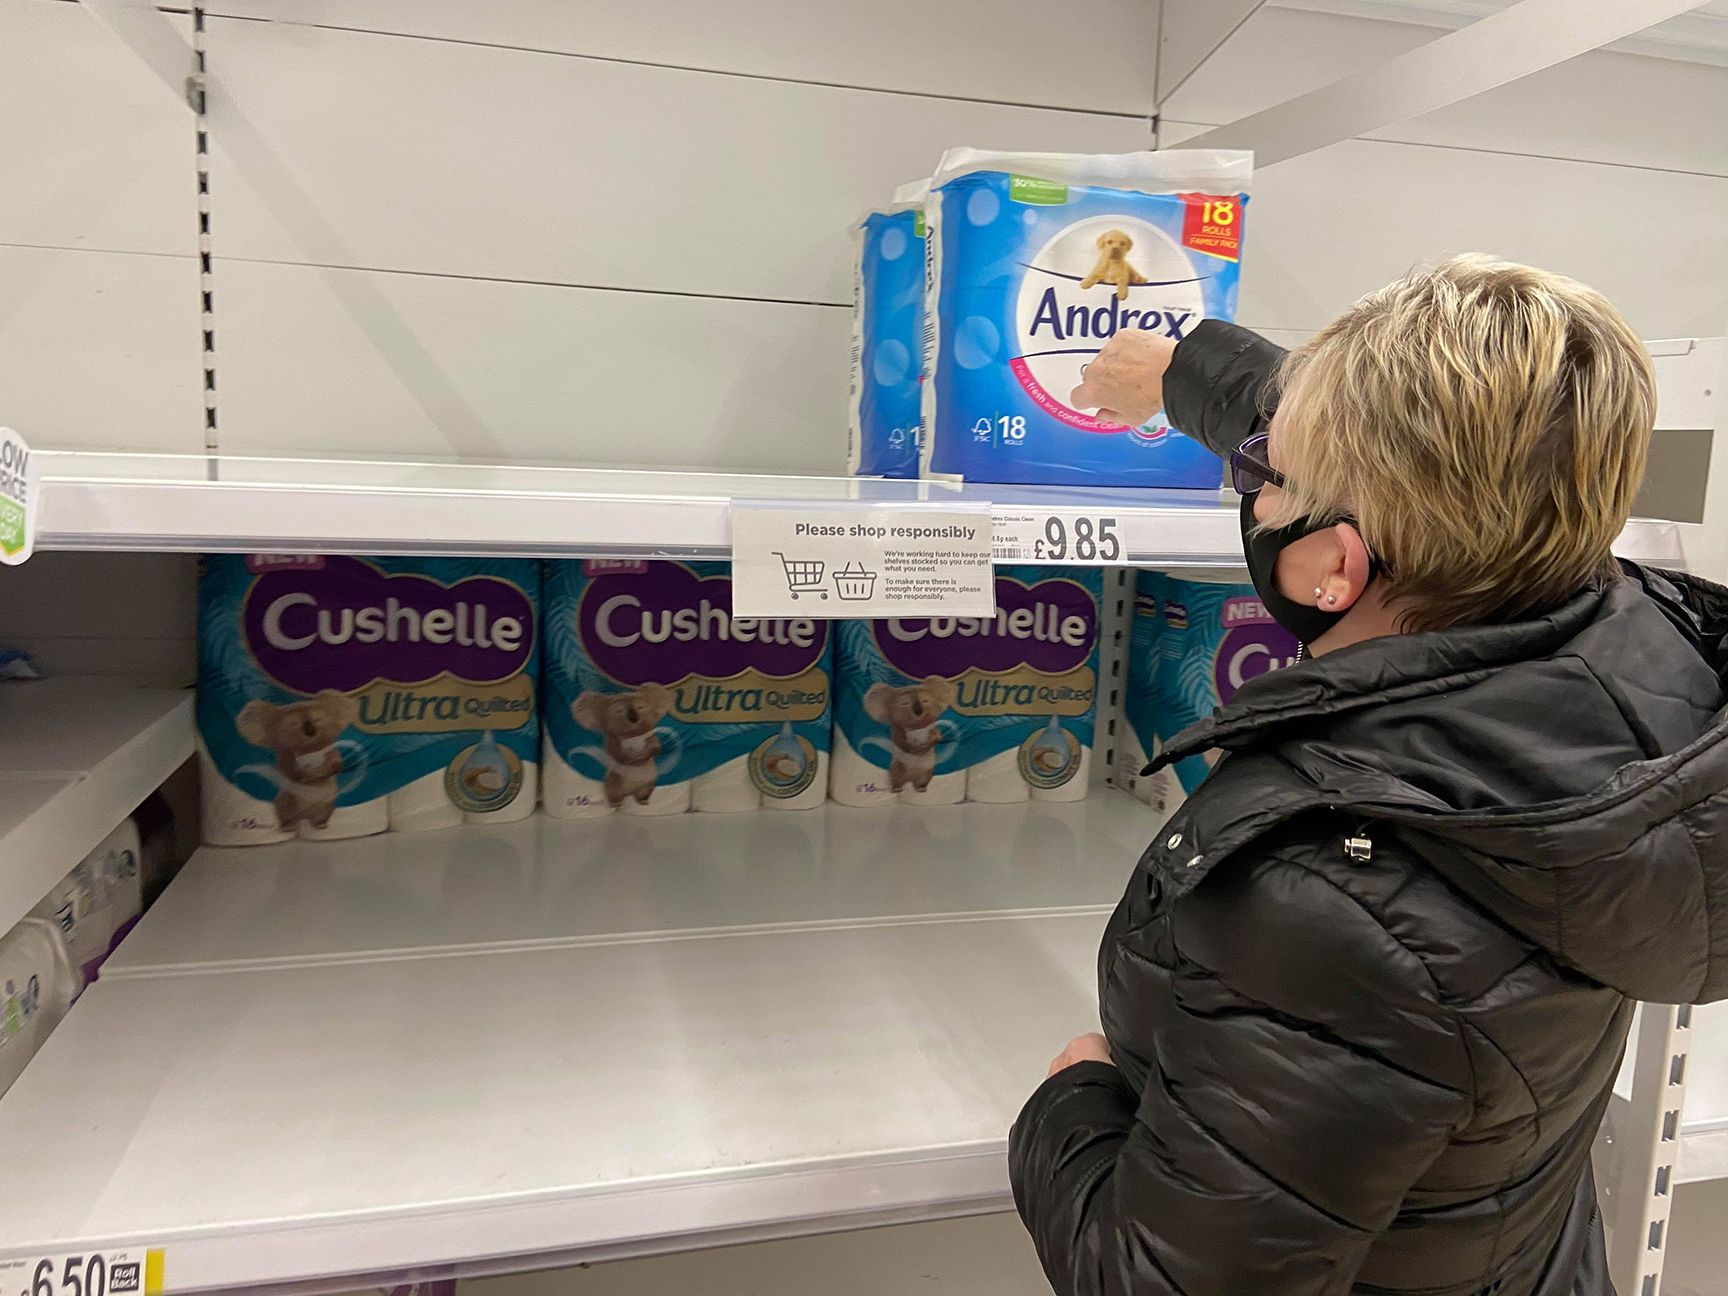 PANIC BUYING: The scene in Asda on Wednesday morning on the day new restrictions were announced by the Stormont Executive